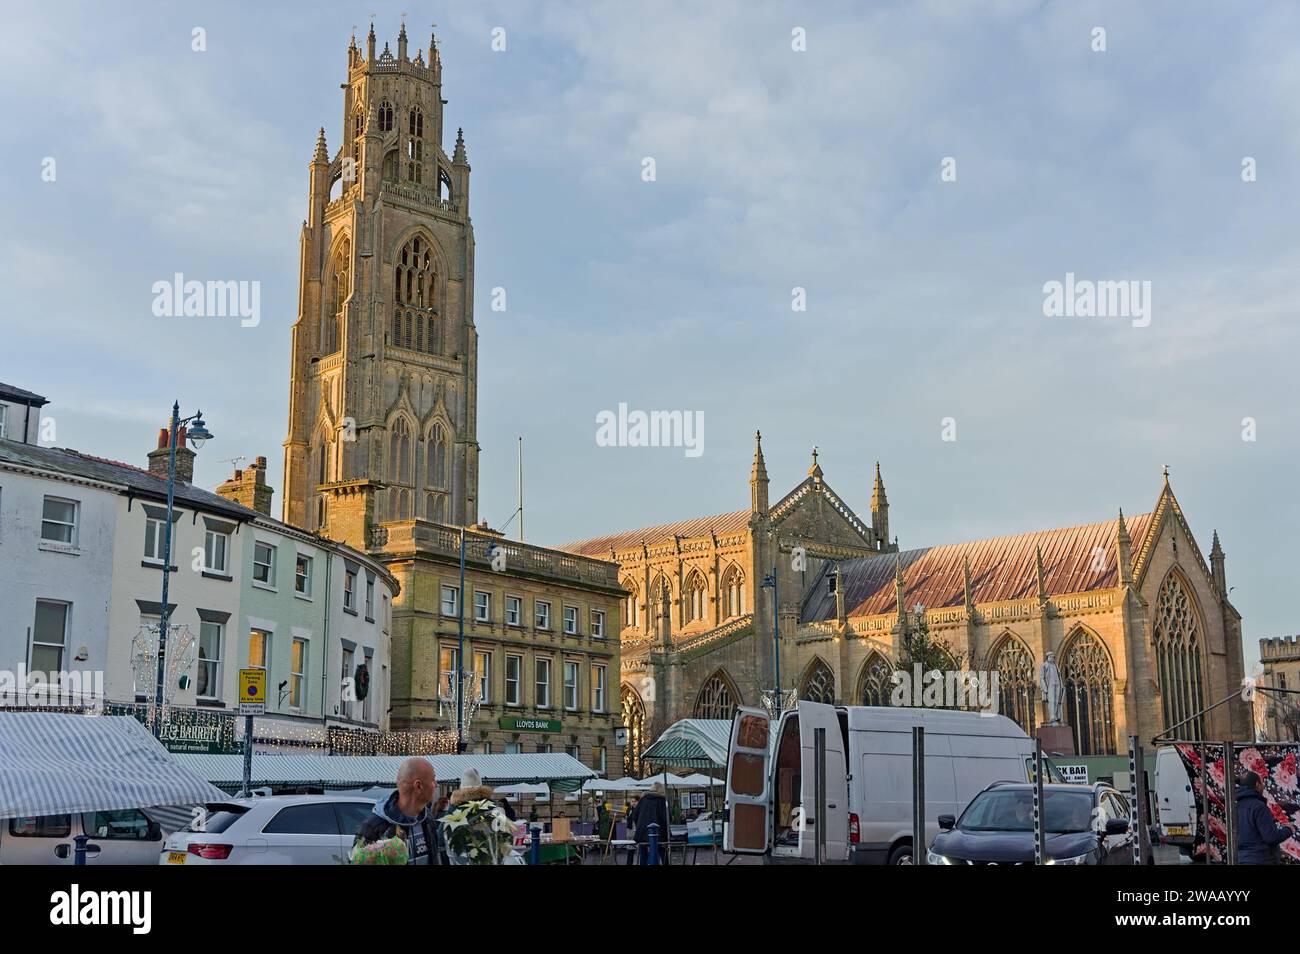 The marketplace before Christmas with Boston stump in the background at sundown Stock Photo